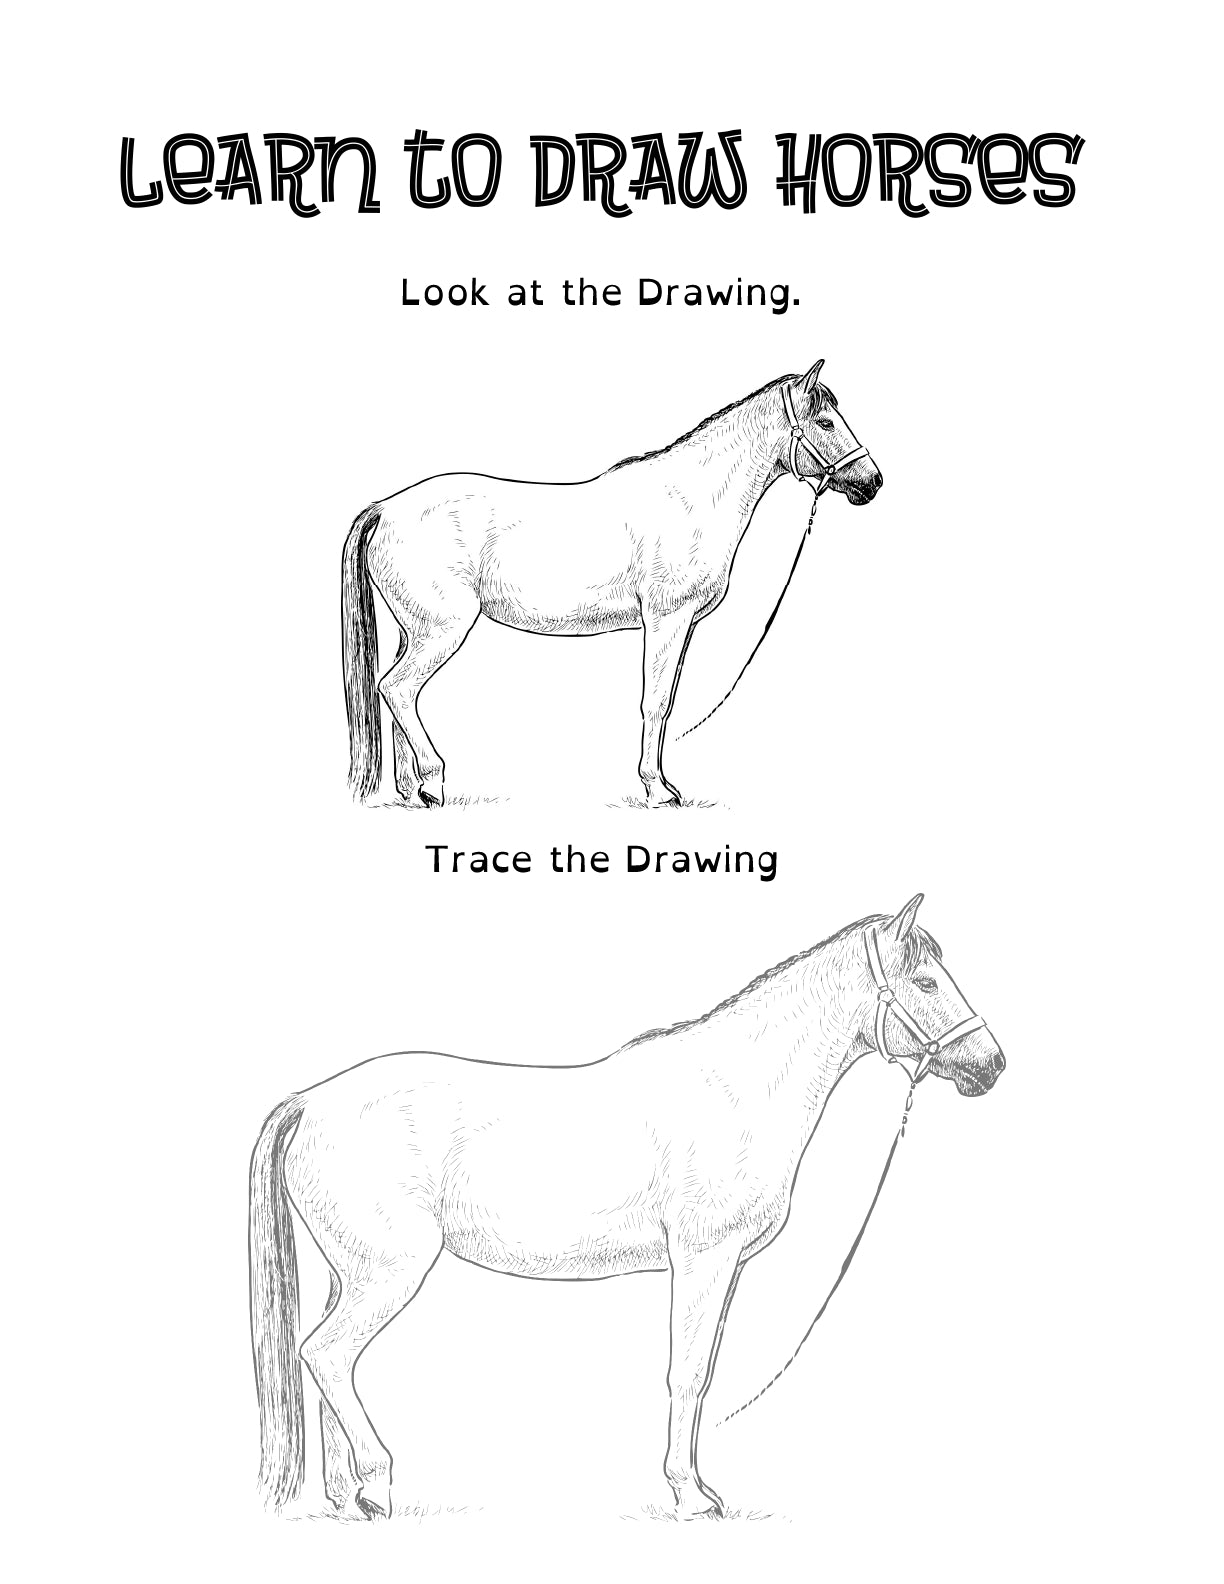 (Age 10+) All About Horses